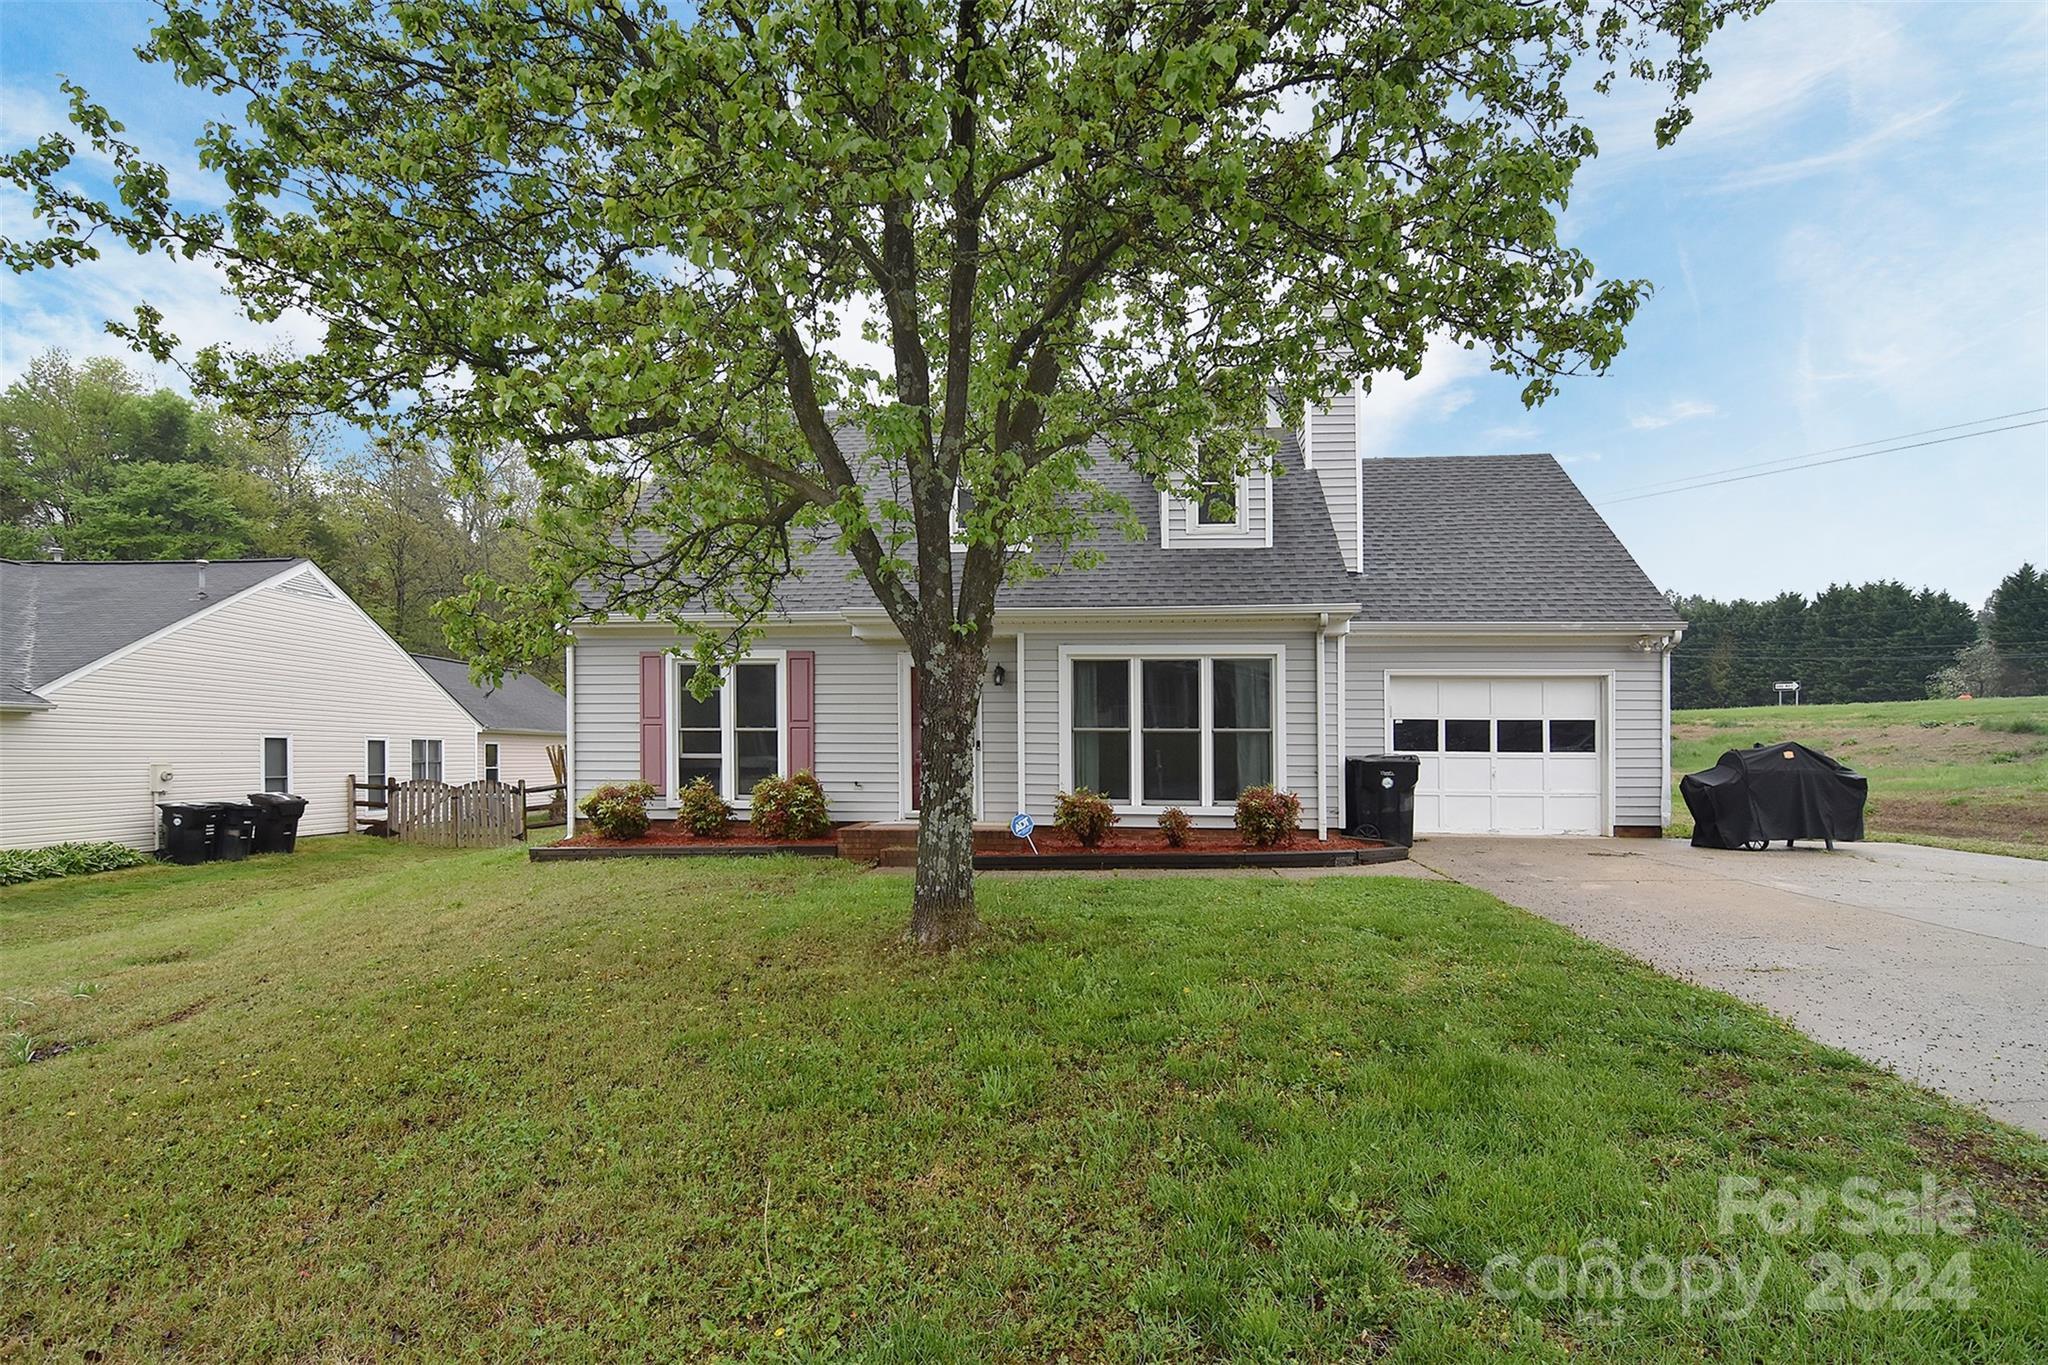 Photo one of 310 Windrose Ln Concord NC 28025 | MLS 4128208